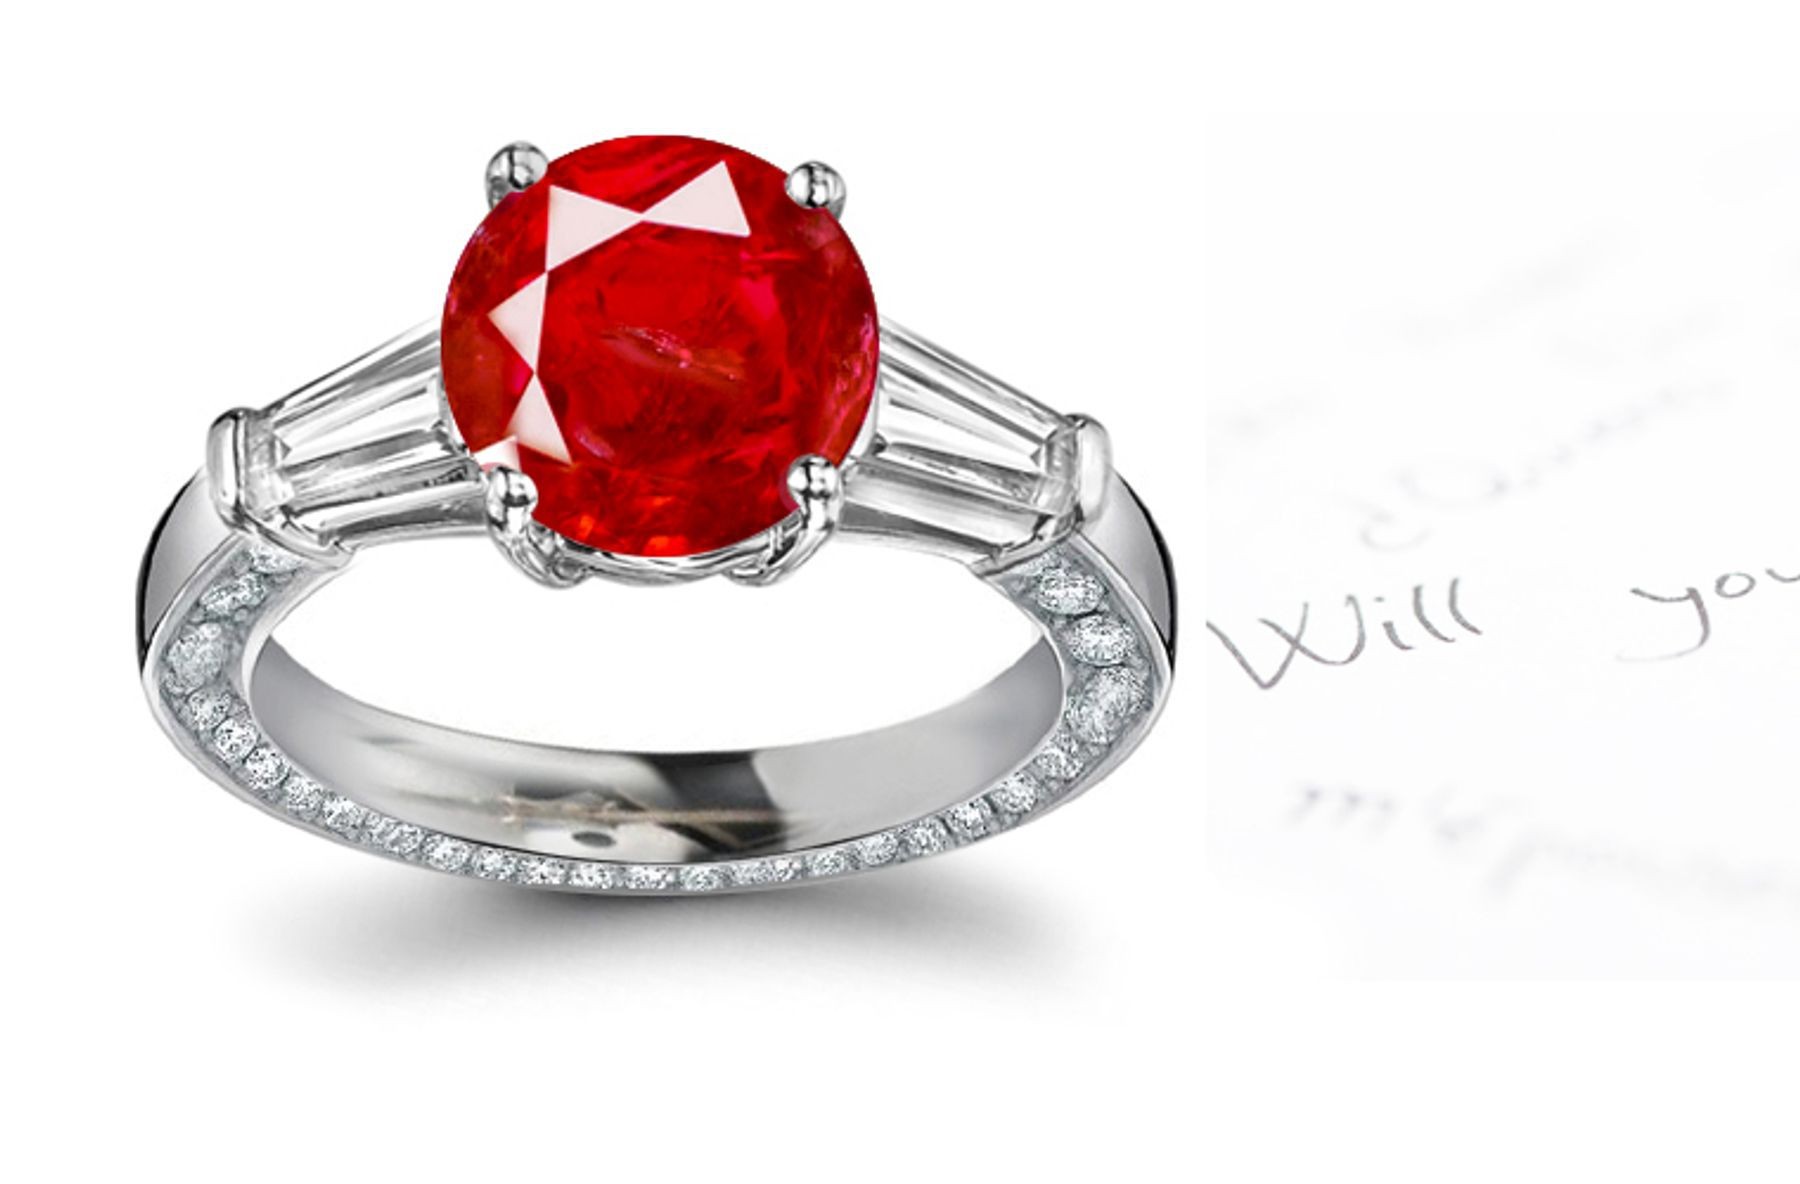 Notably Many Exclusive: Majestic Design 3 Stone Round Ruby & Baguette Diamond Ring in Diamond Decoration Inserted Part of Gold Front Side Body